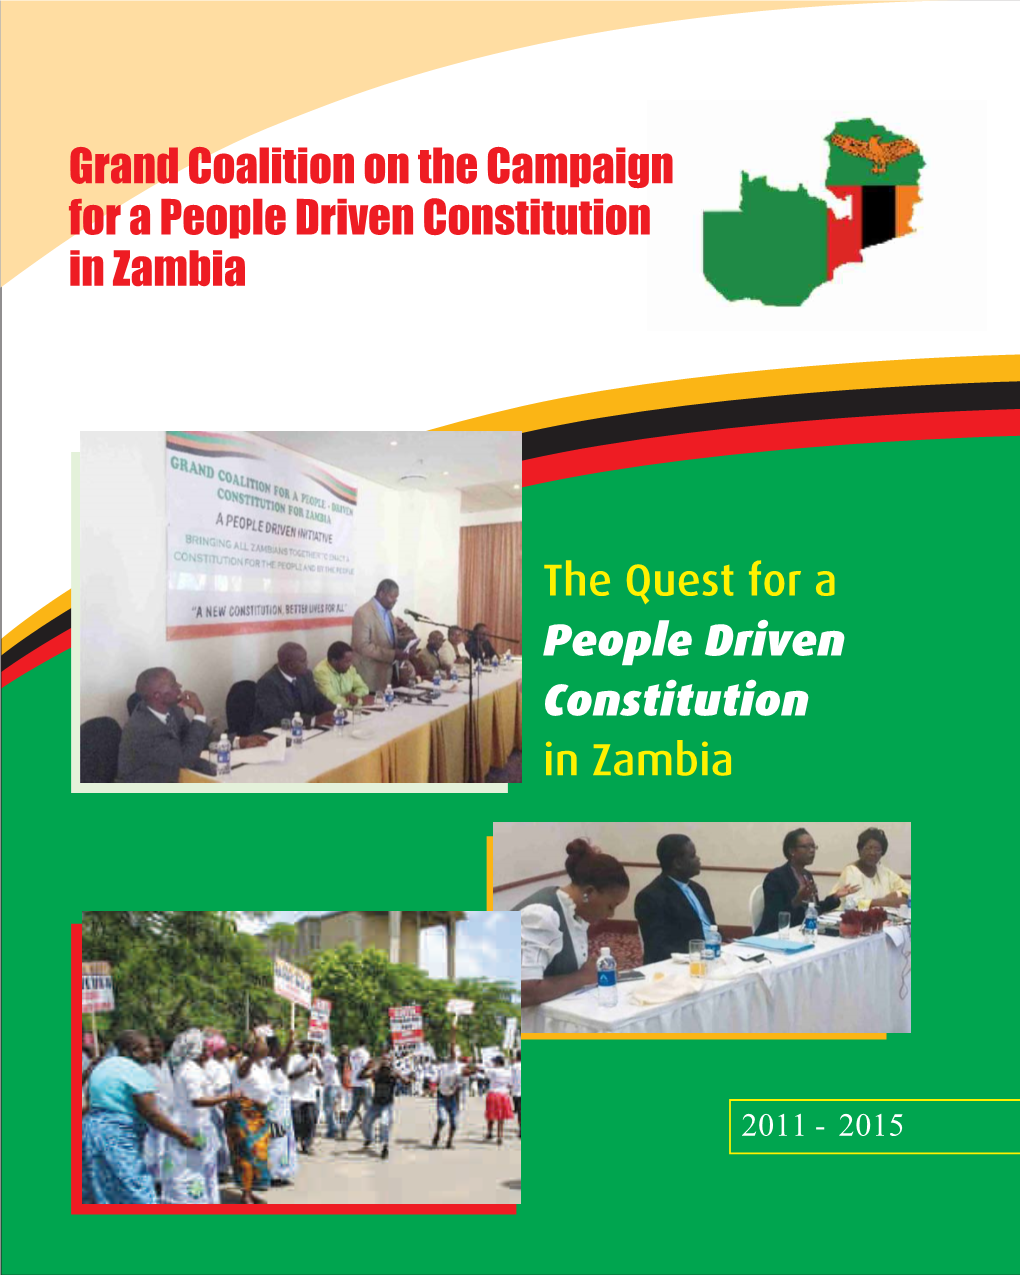 Grand Coalition for a People Driven Constitution